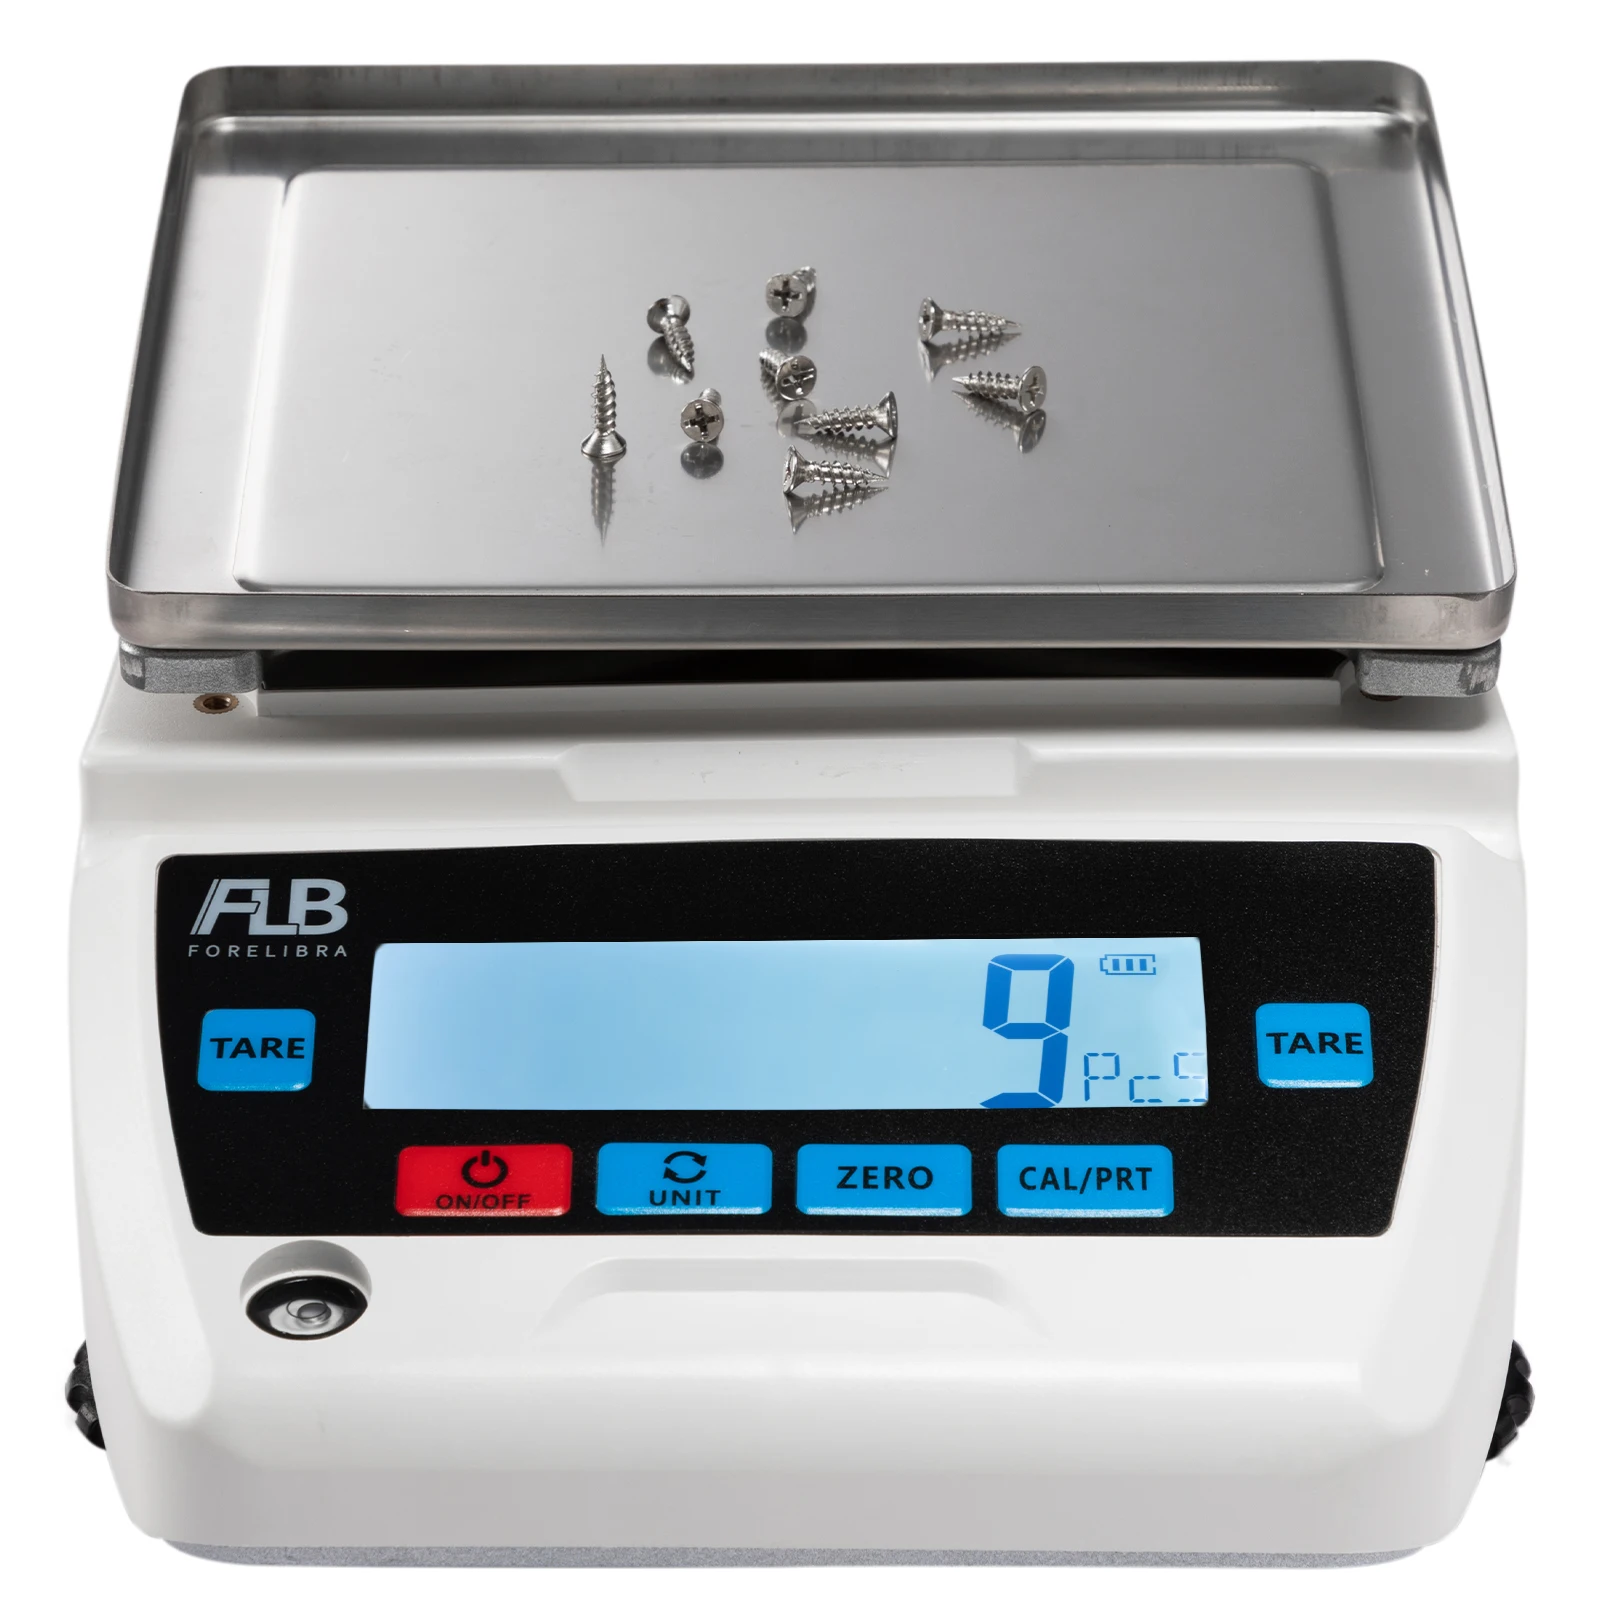 Ultra Precision Scales  Accurate Industrial Weighing